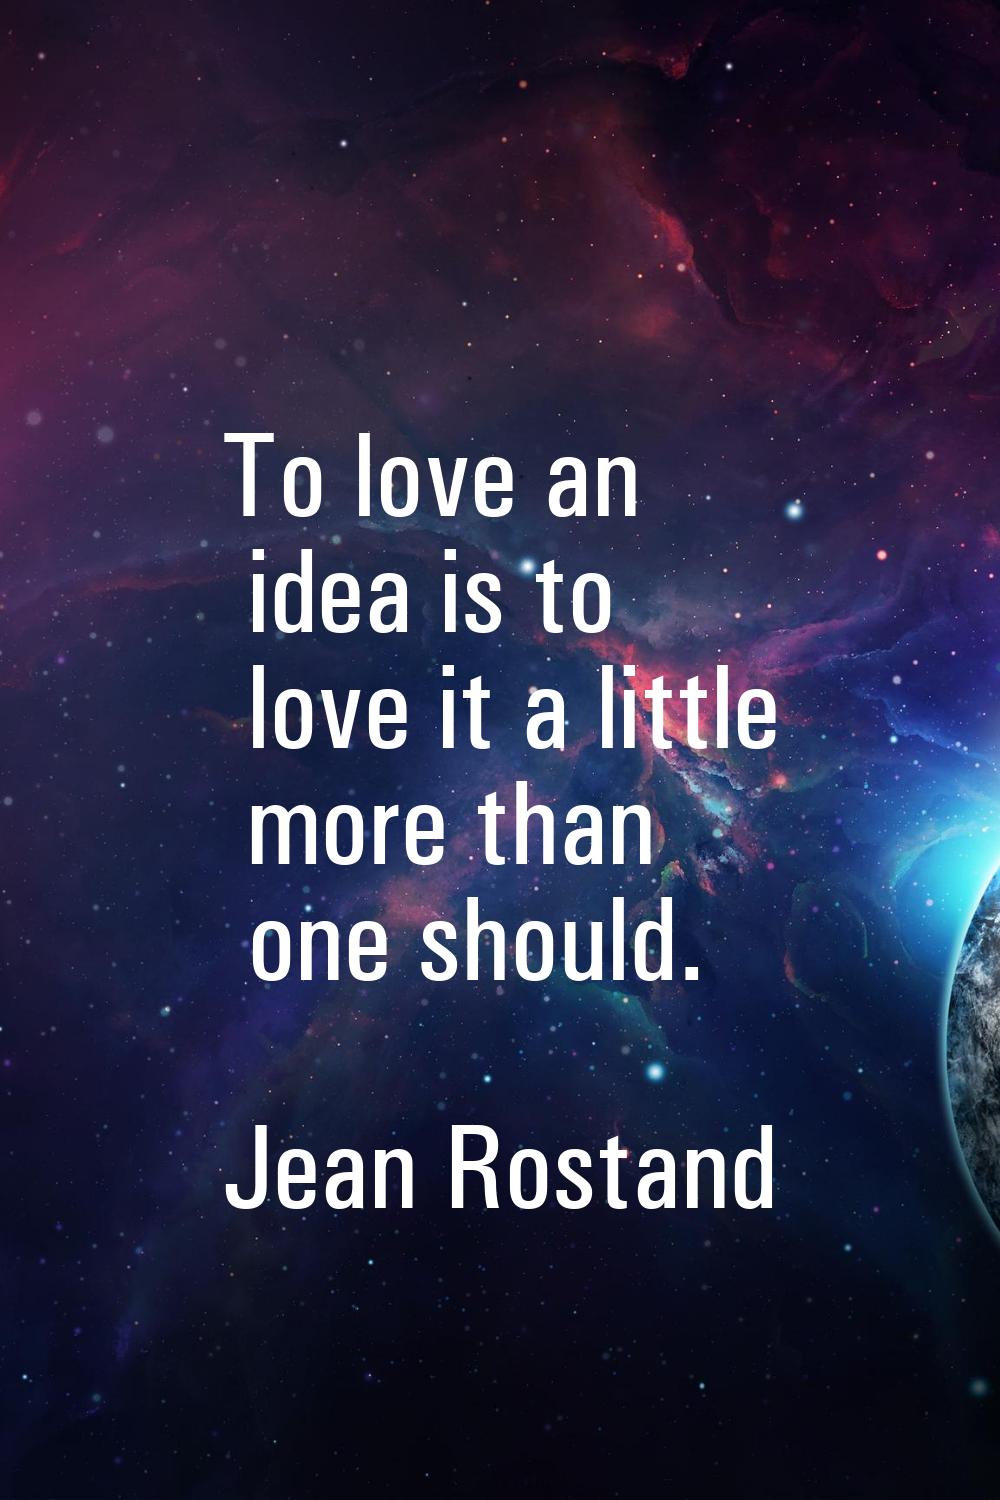 To love an idea is to love it a little more than one should.